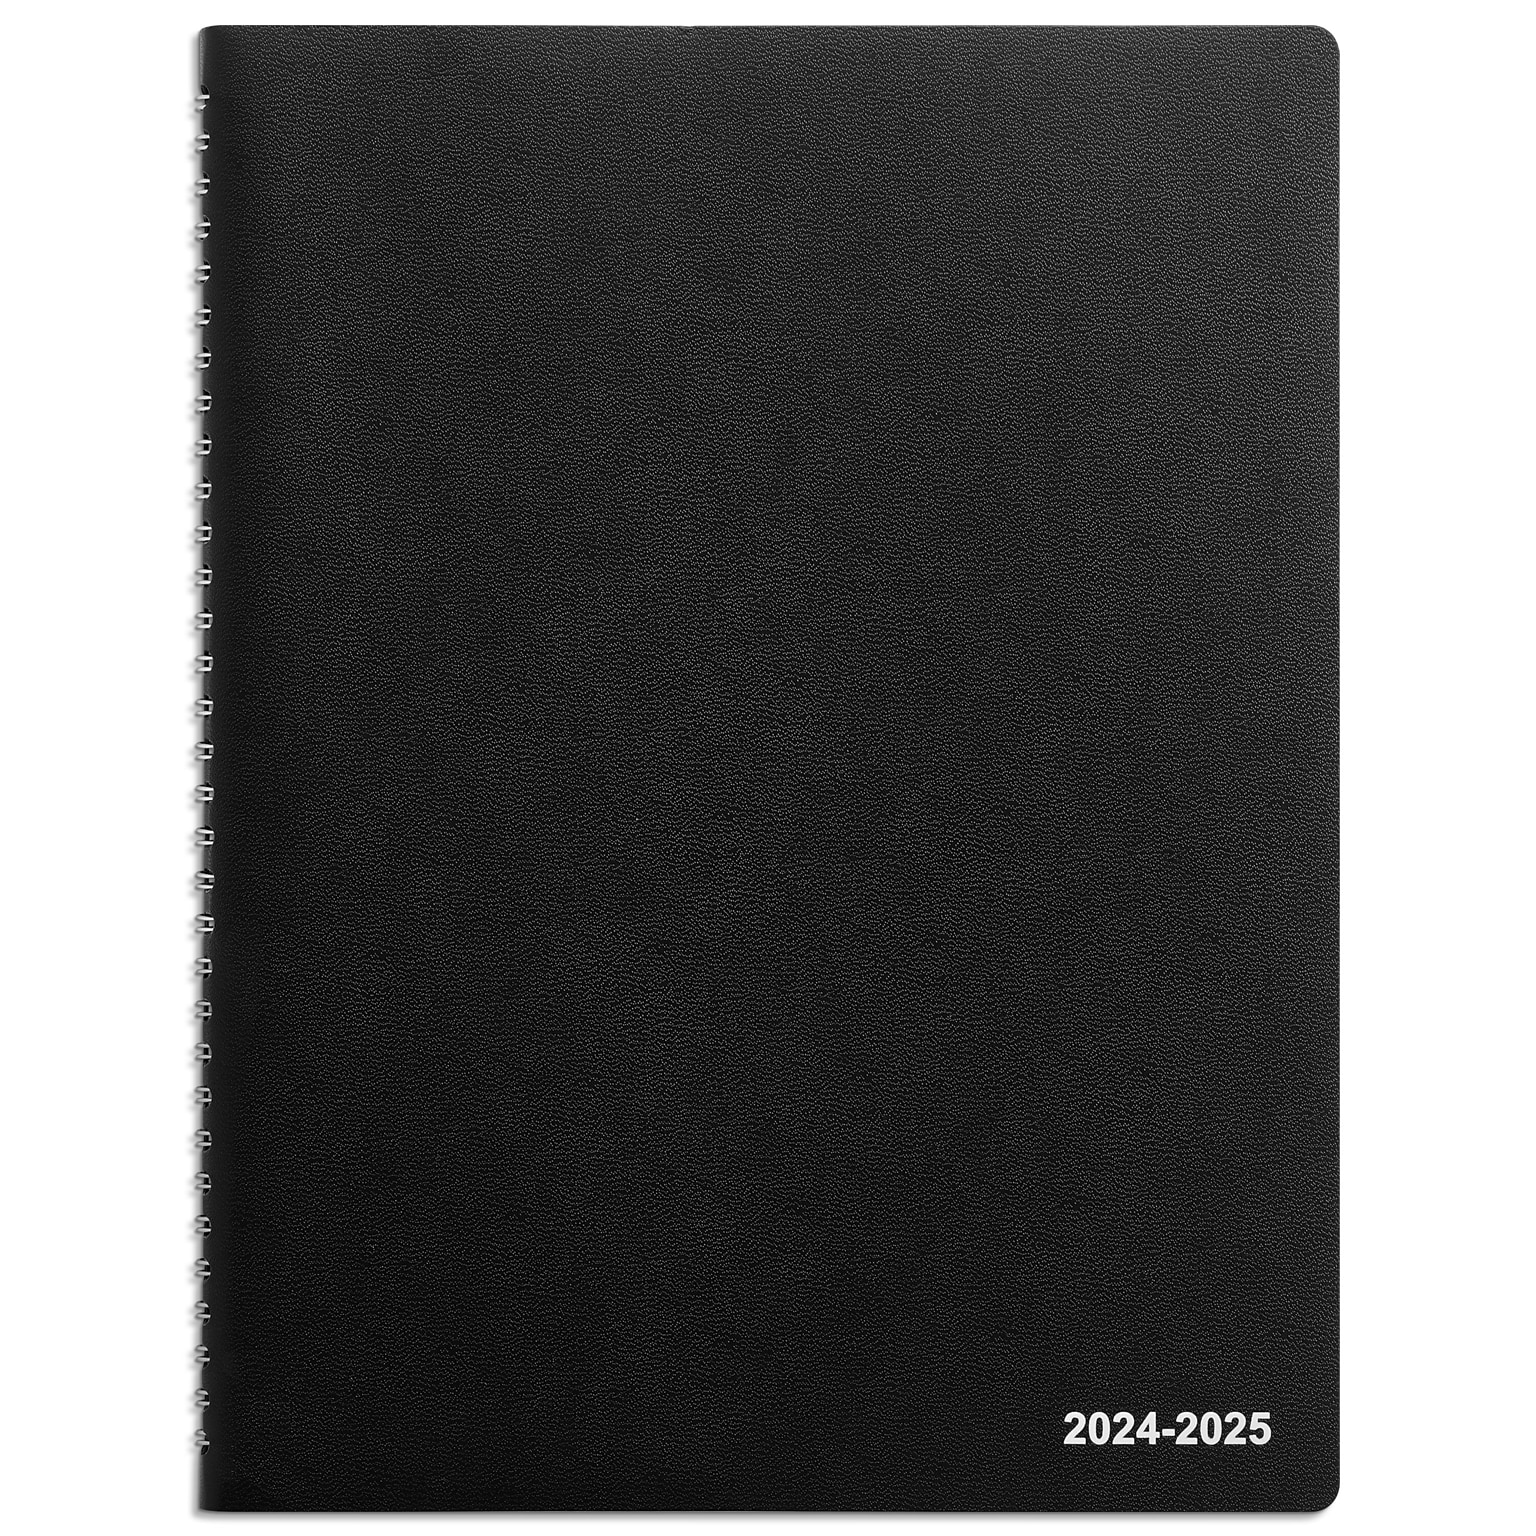 2024-2025 Staples 8 x 11 Academic Weekly & Monthly Appointment Book, Faux Leather Cover, Black (ST60363-23)